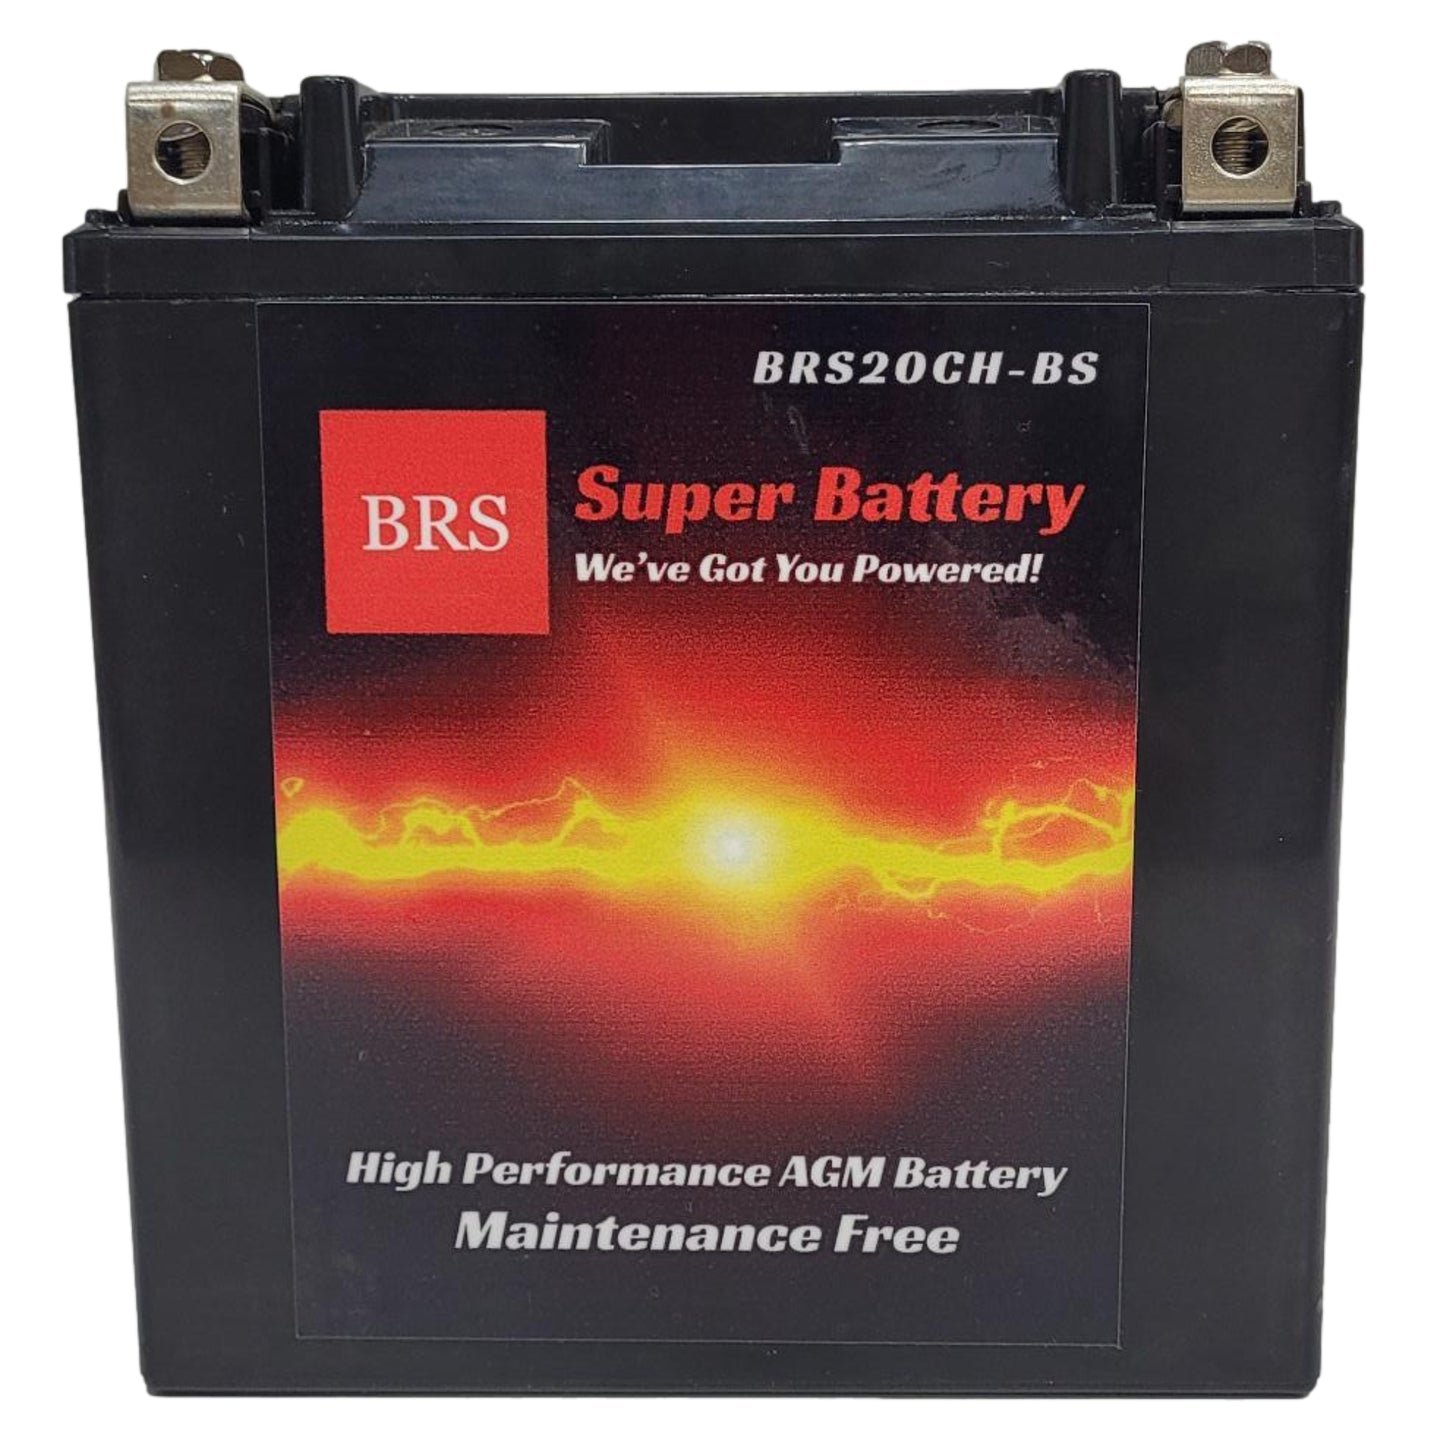 WPX20CH-BS 12v High Performance Sealed AGM PowerSport 10 Year Battery - BRS Super Battery